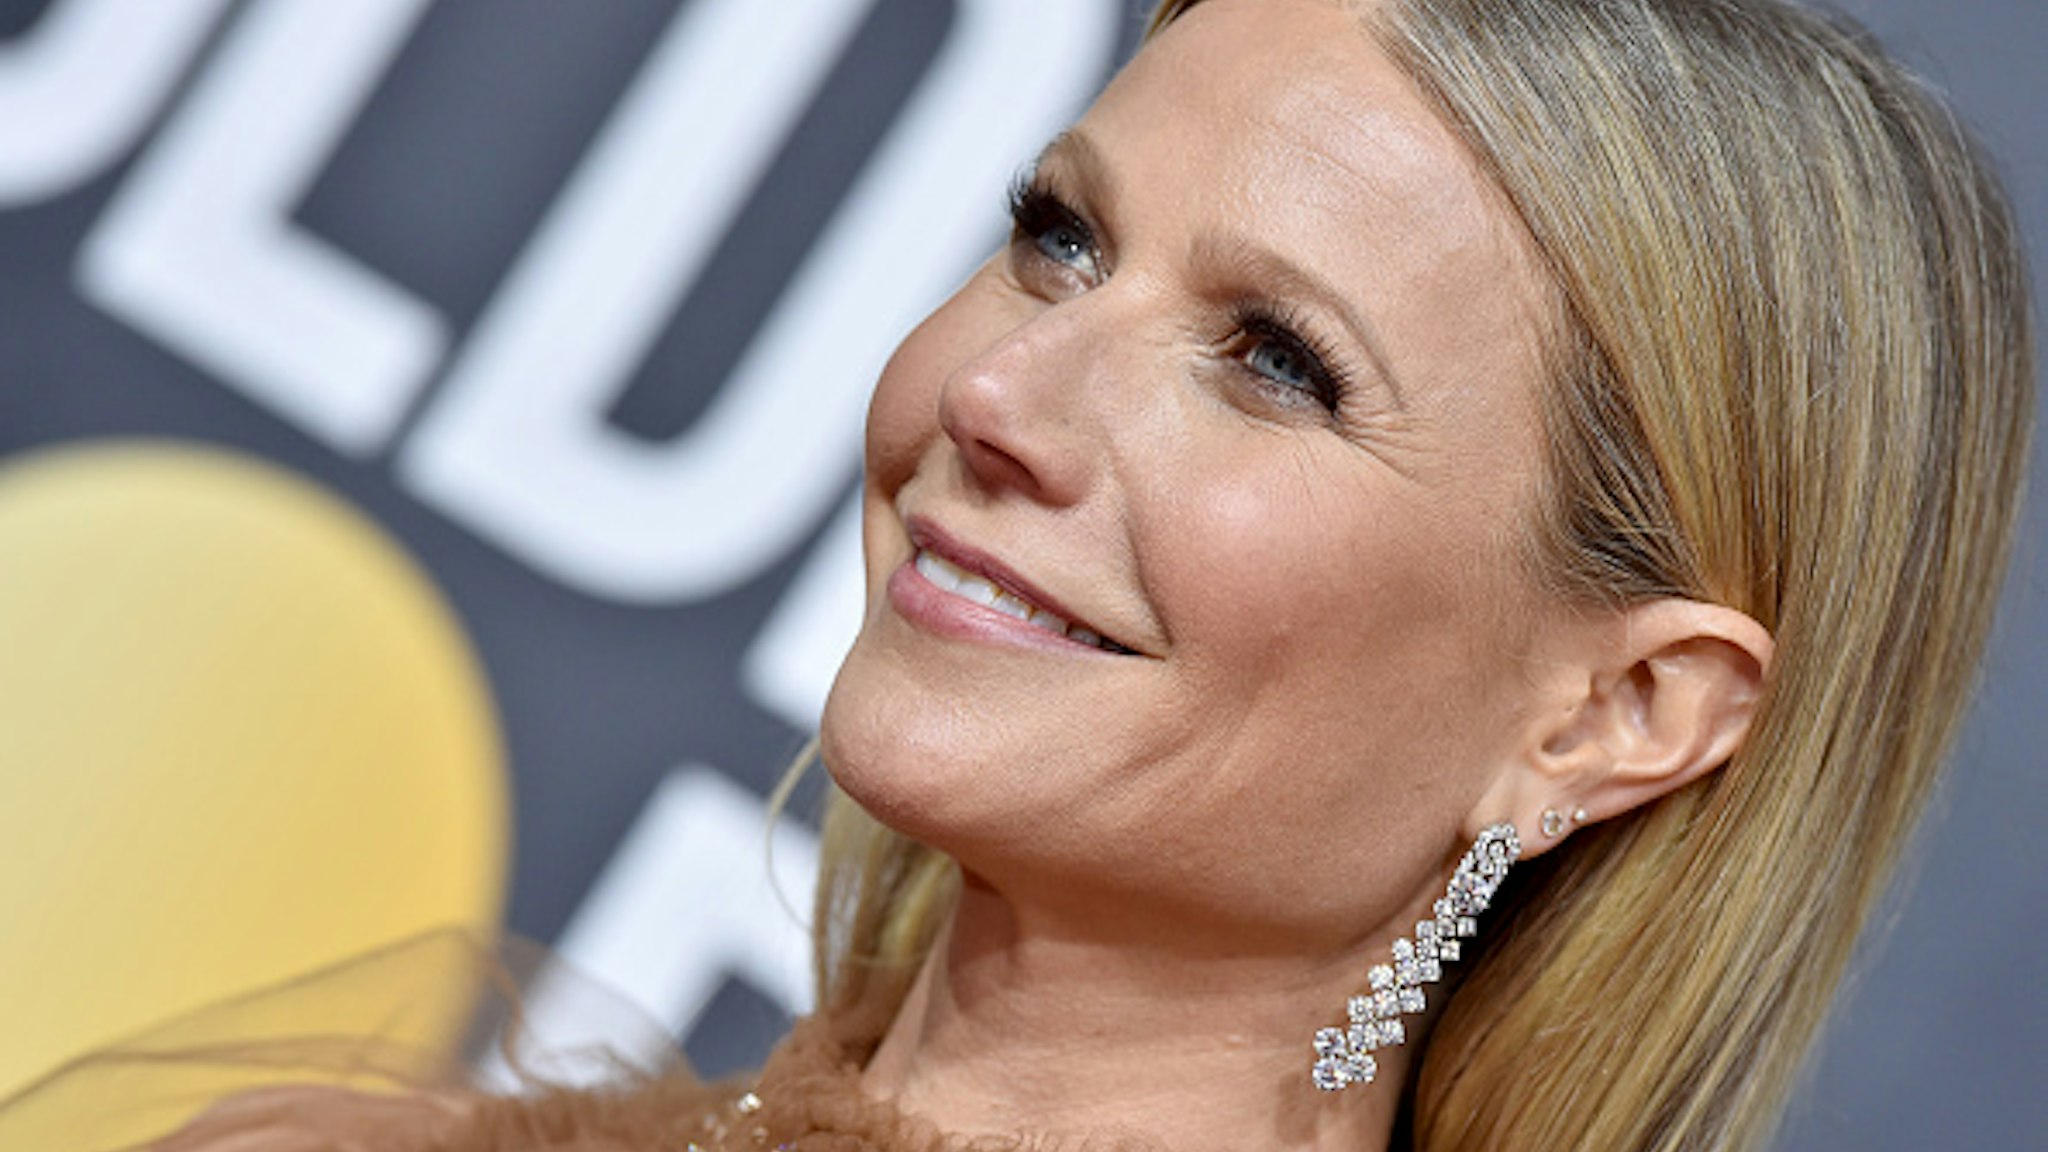 BEVERLY HILLS, CALIFORNIA - JANUARY 05: Gwyneth Paltrow attends the 77th Annual Golden Globe Awards at The Beverly Hilton Hotel on January 05, 2020 in Beverly Hills, California.